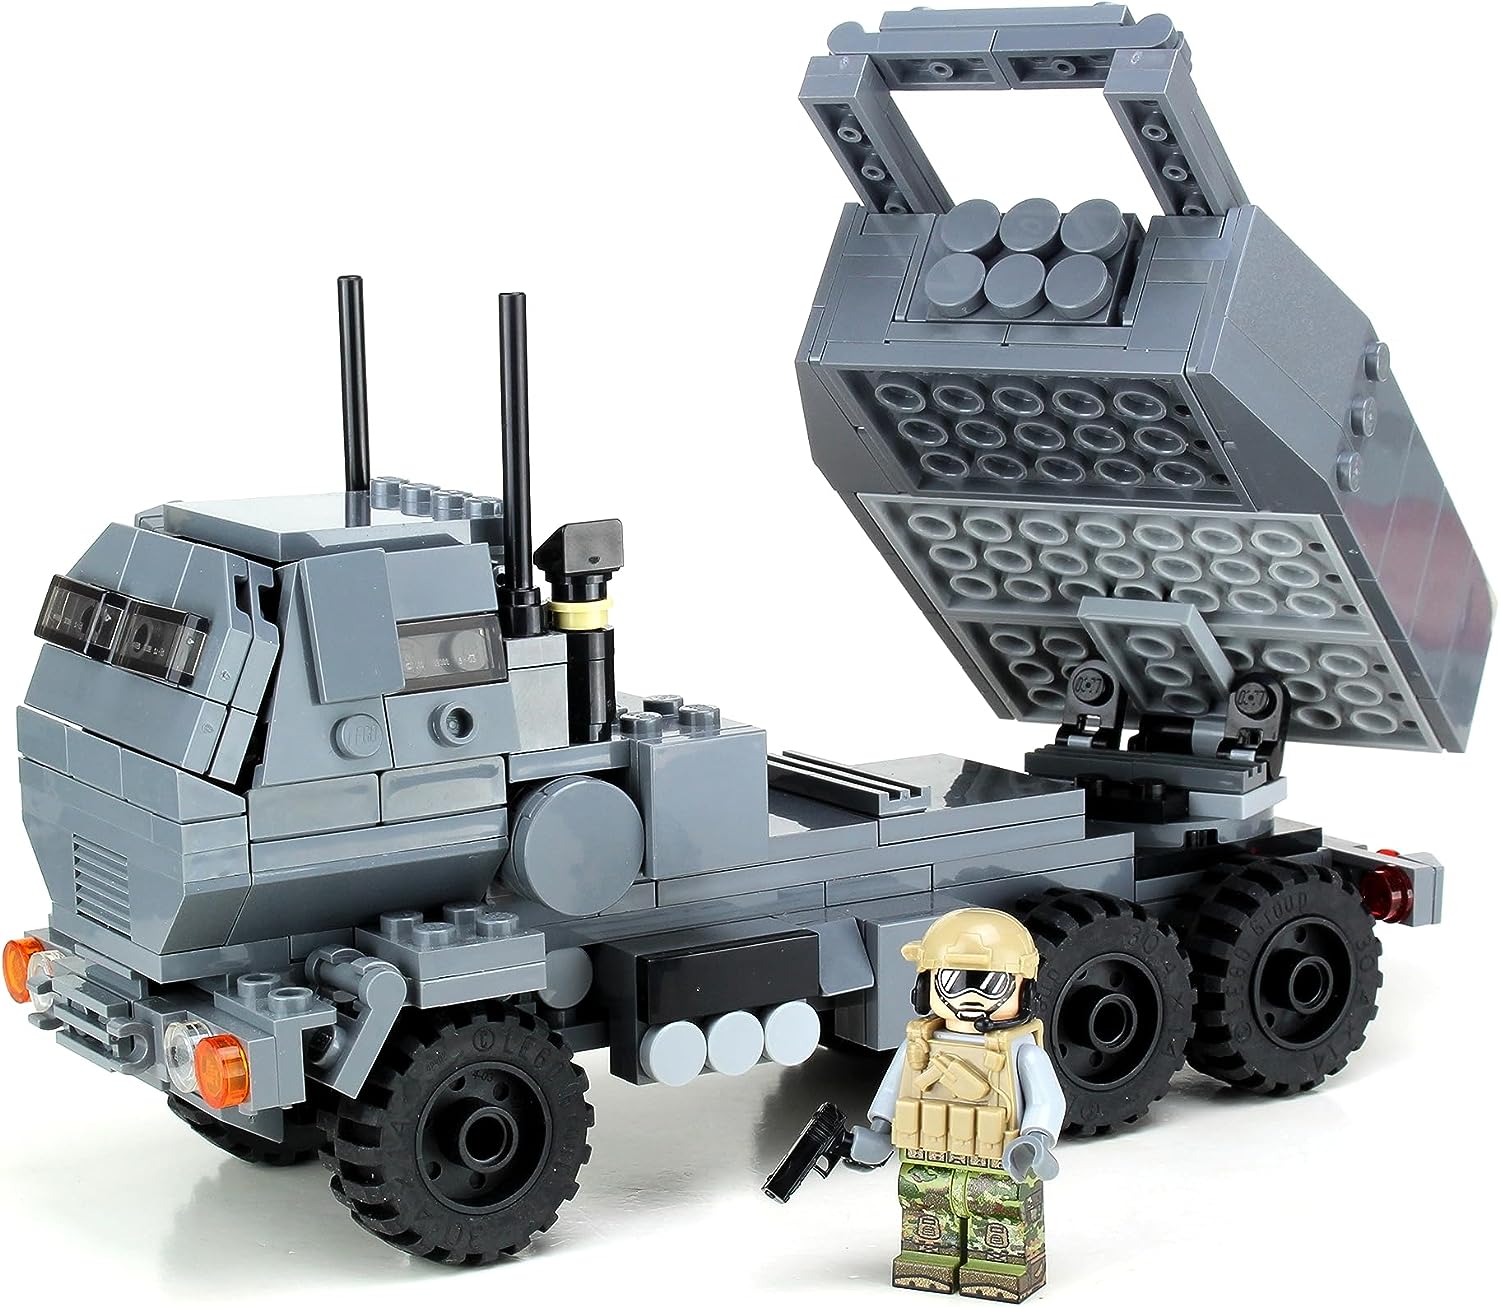 Army Mobile Rocket Artillery - Custom Military Set made using LEGO parts